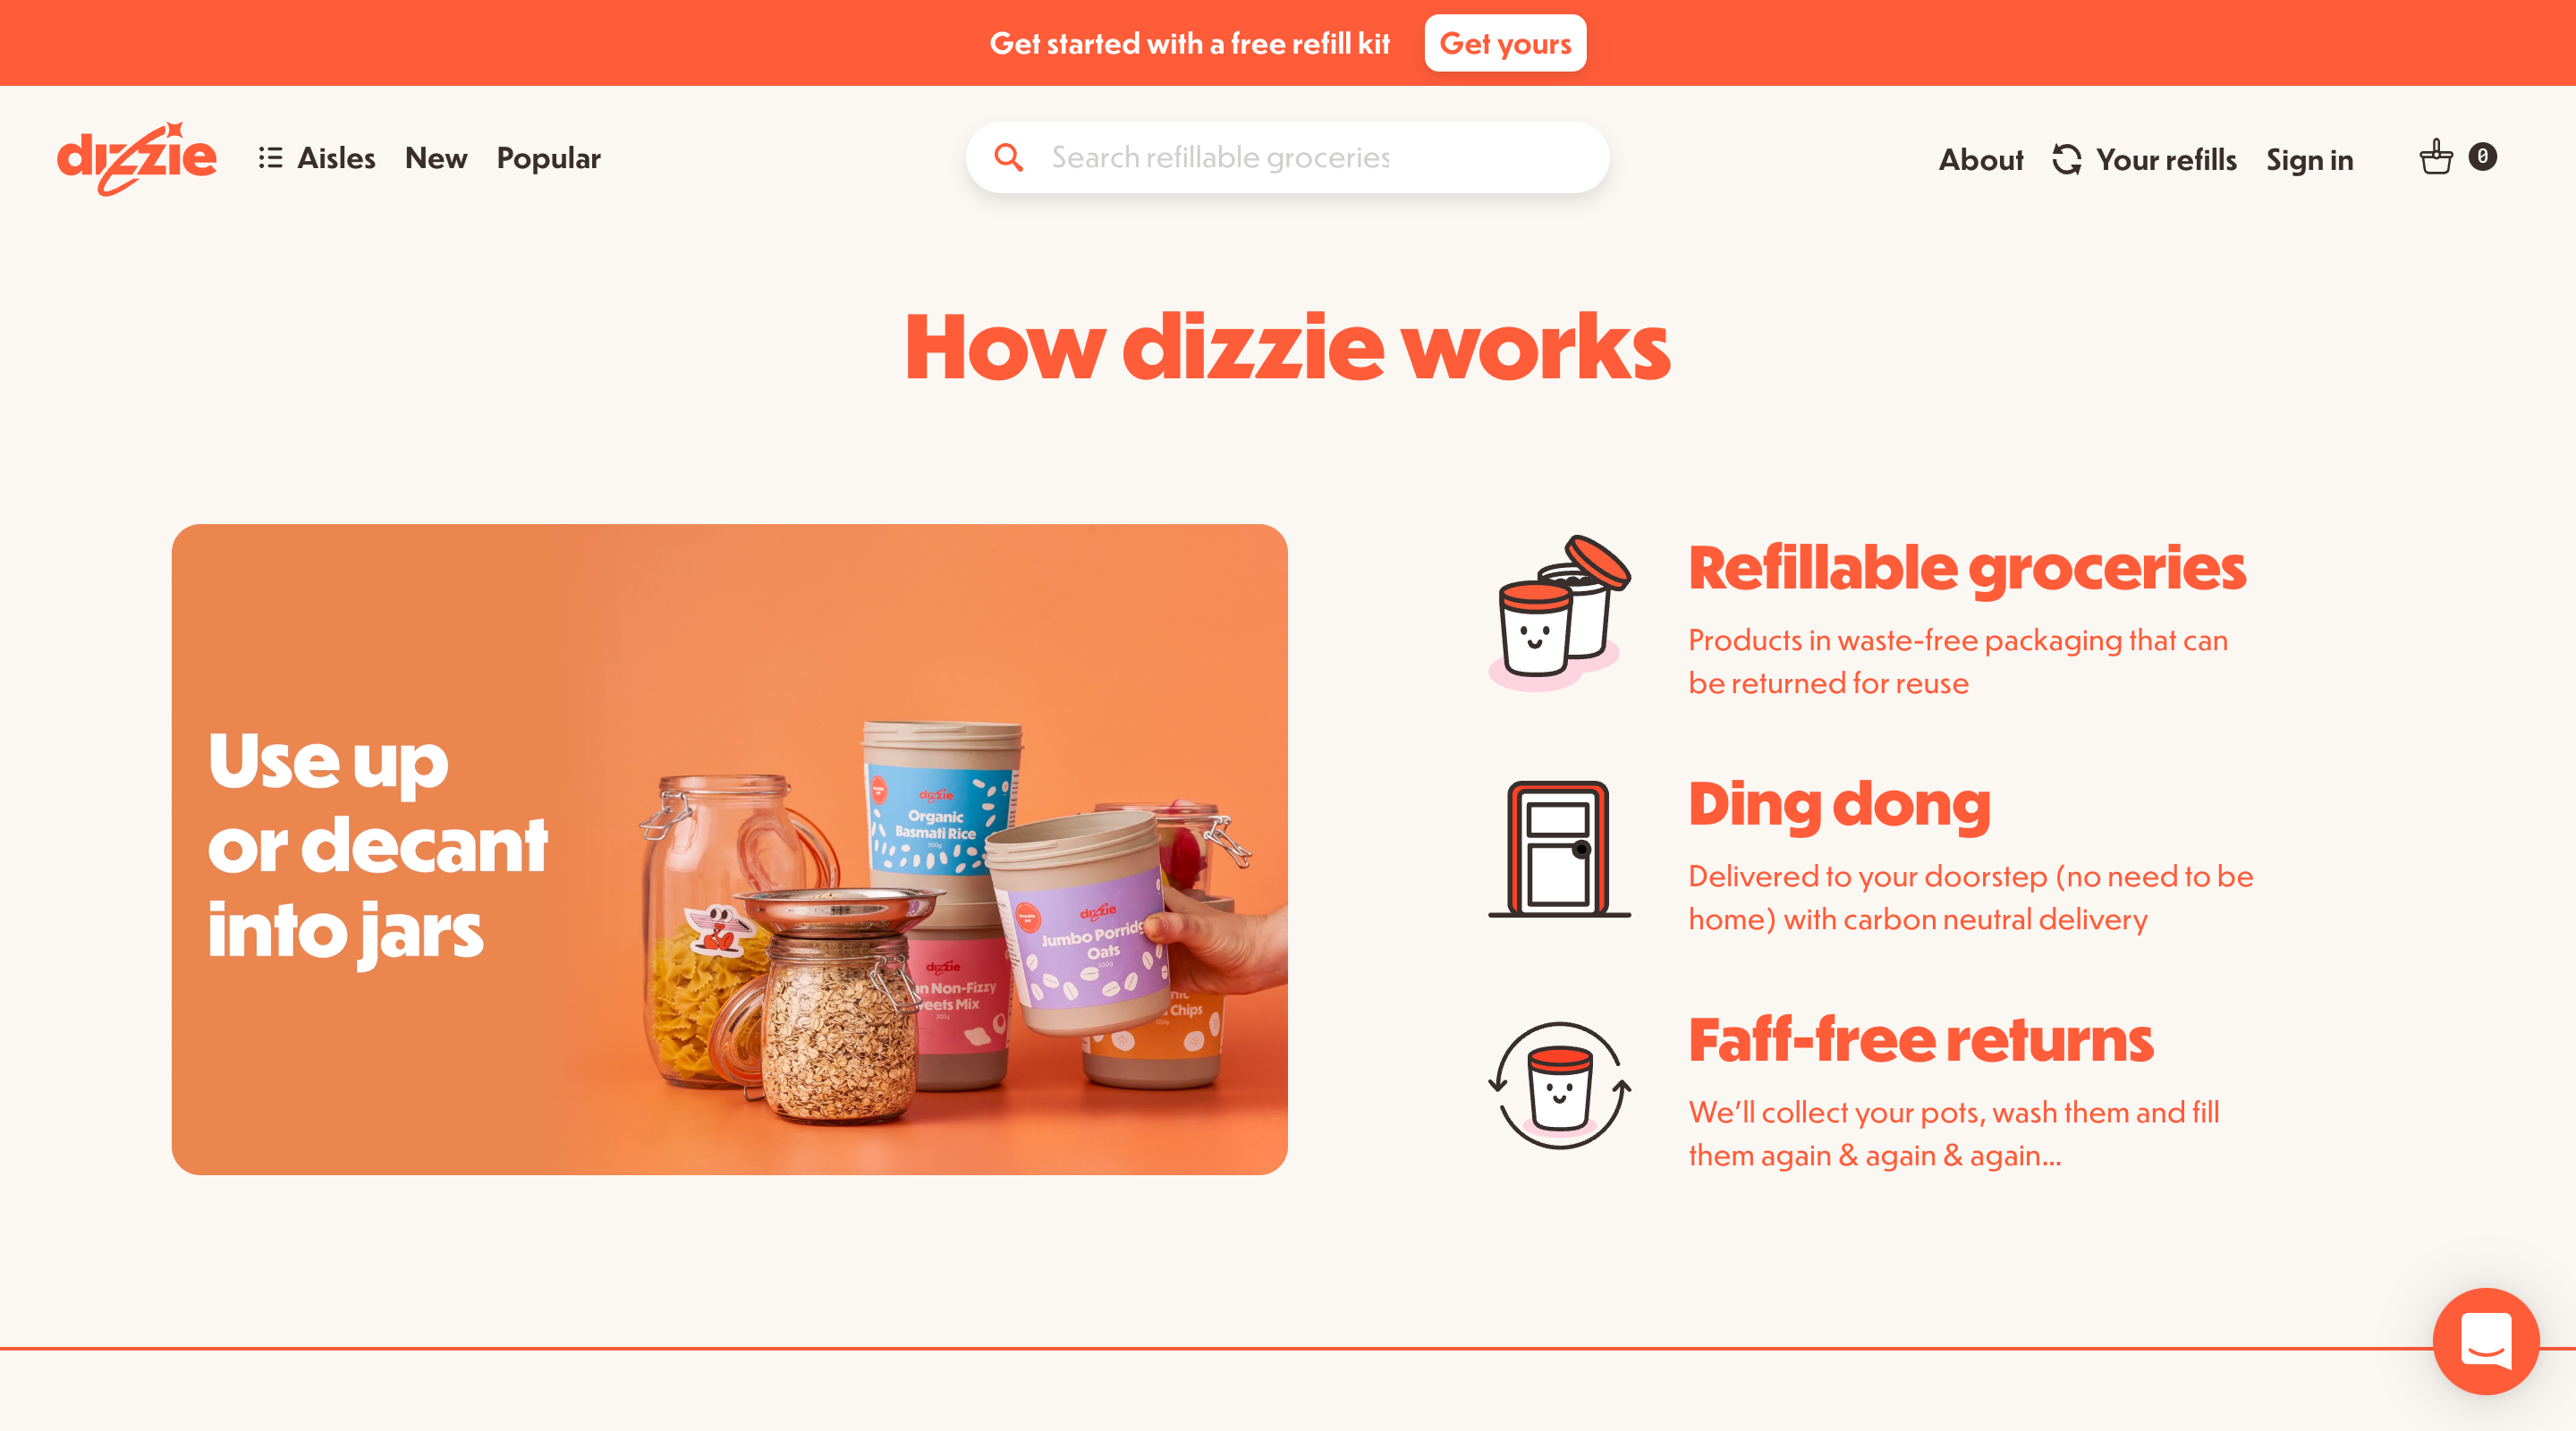 Screenshot of the 'How dizzie works' page of the Dizzie website. The header contains the Dizzie logo, main navigation, and a search bar. An image shows Dizzie pots being decanted into mason jars. Beside this the Dizzie process is explained in three steps with short descriptions and stylized icons.